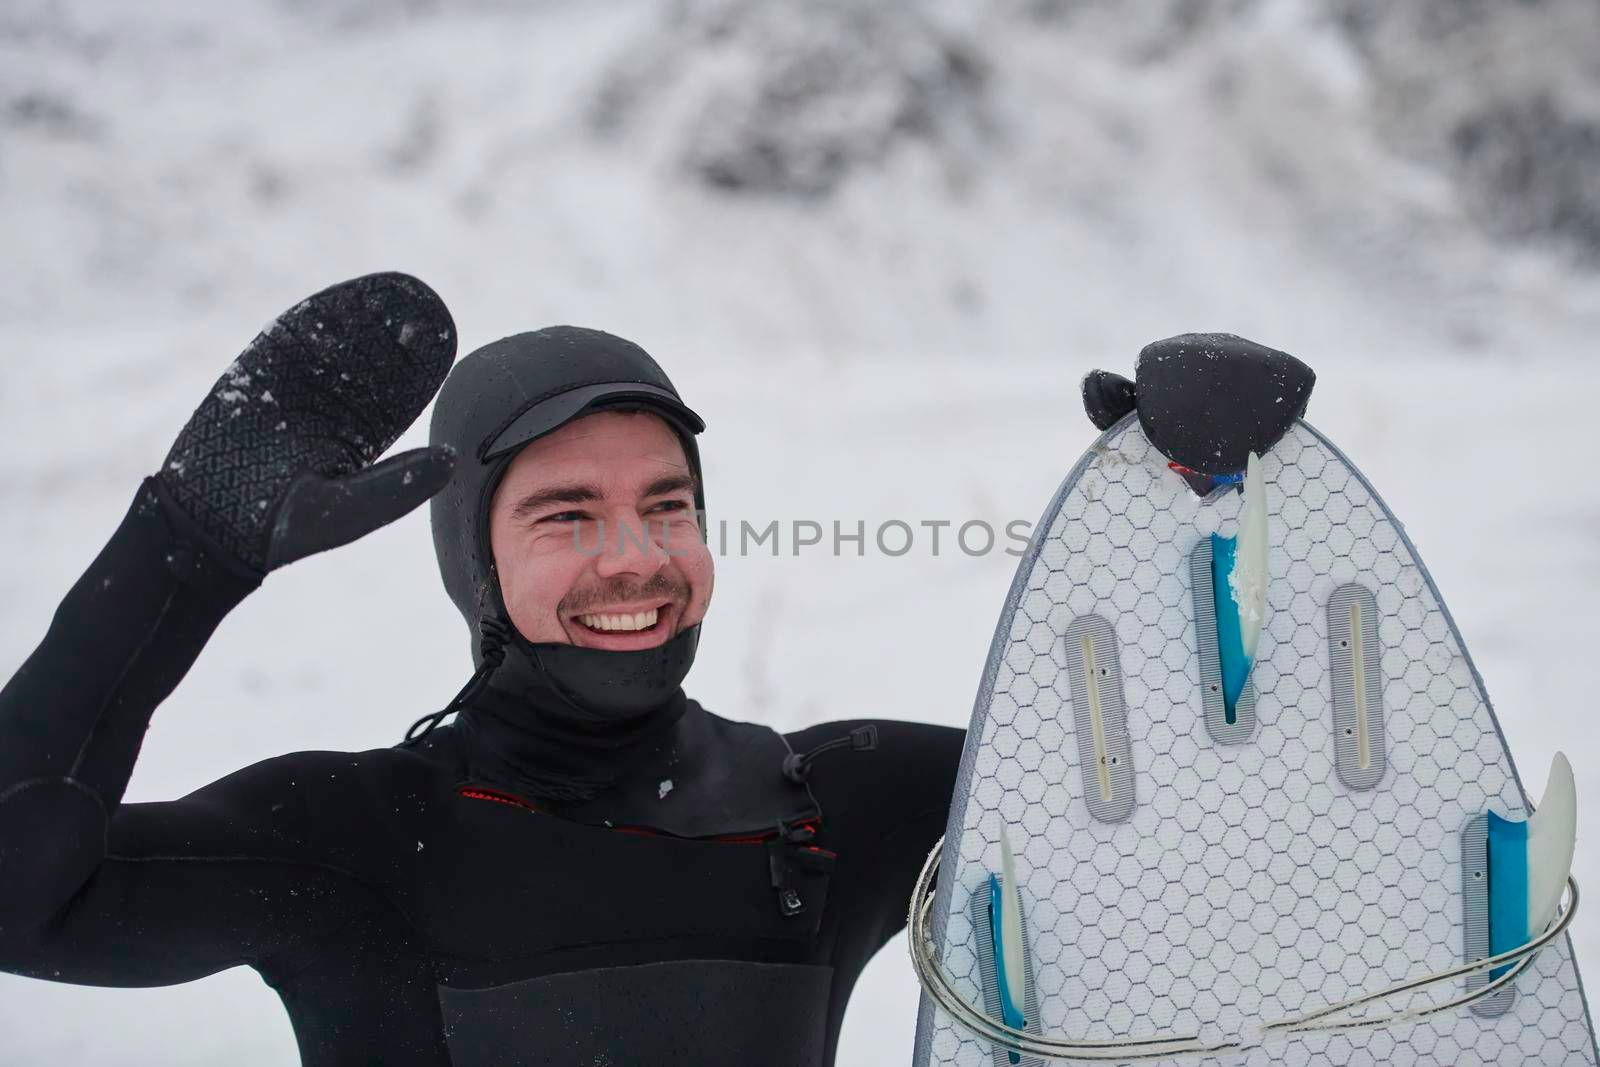 Authentic local Arctic surfer portrait holding a board after surfing in Norwegian sea. Snow capped mountain background. Winter water activities extreme sport